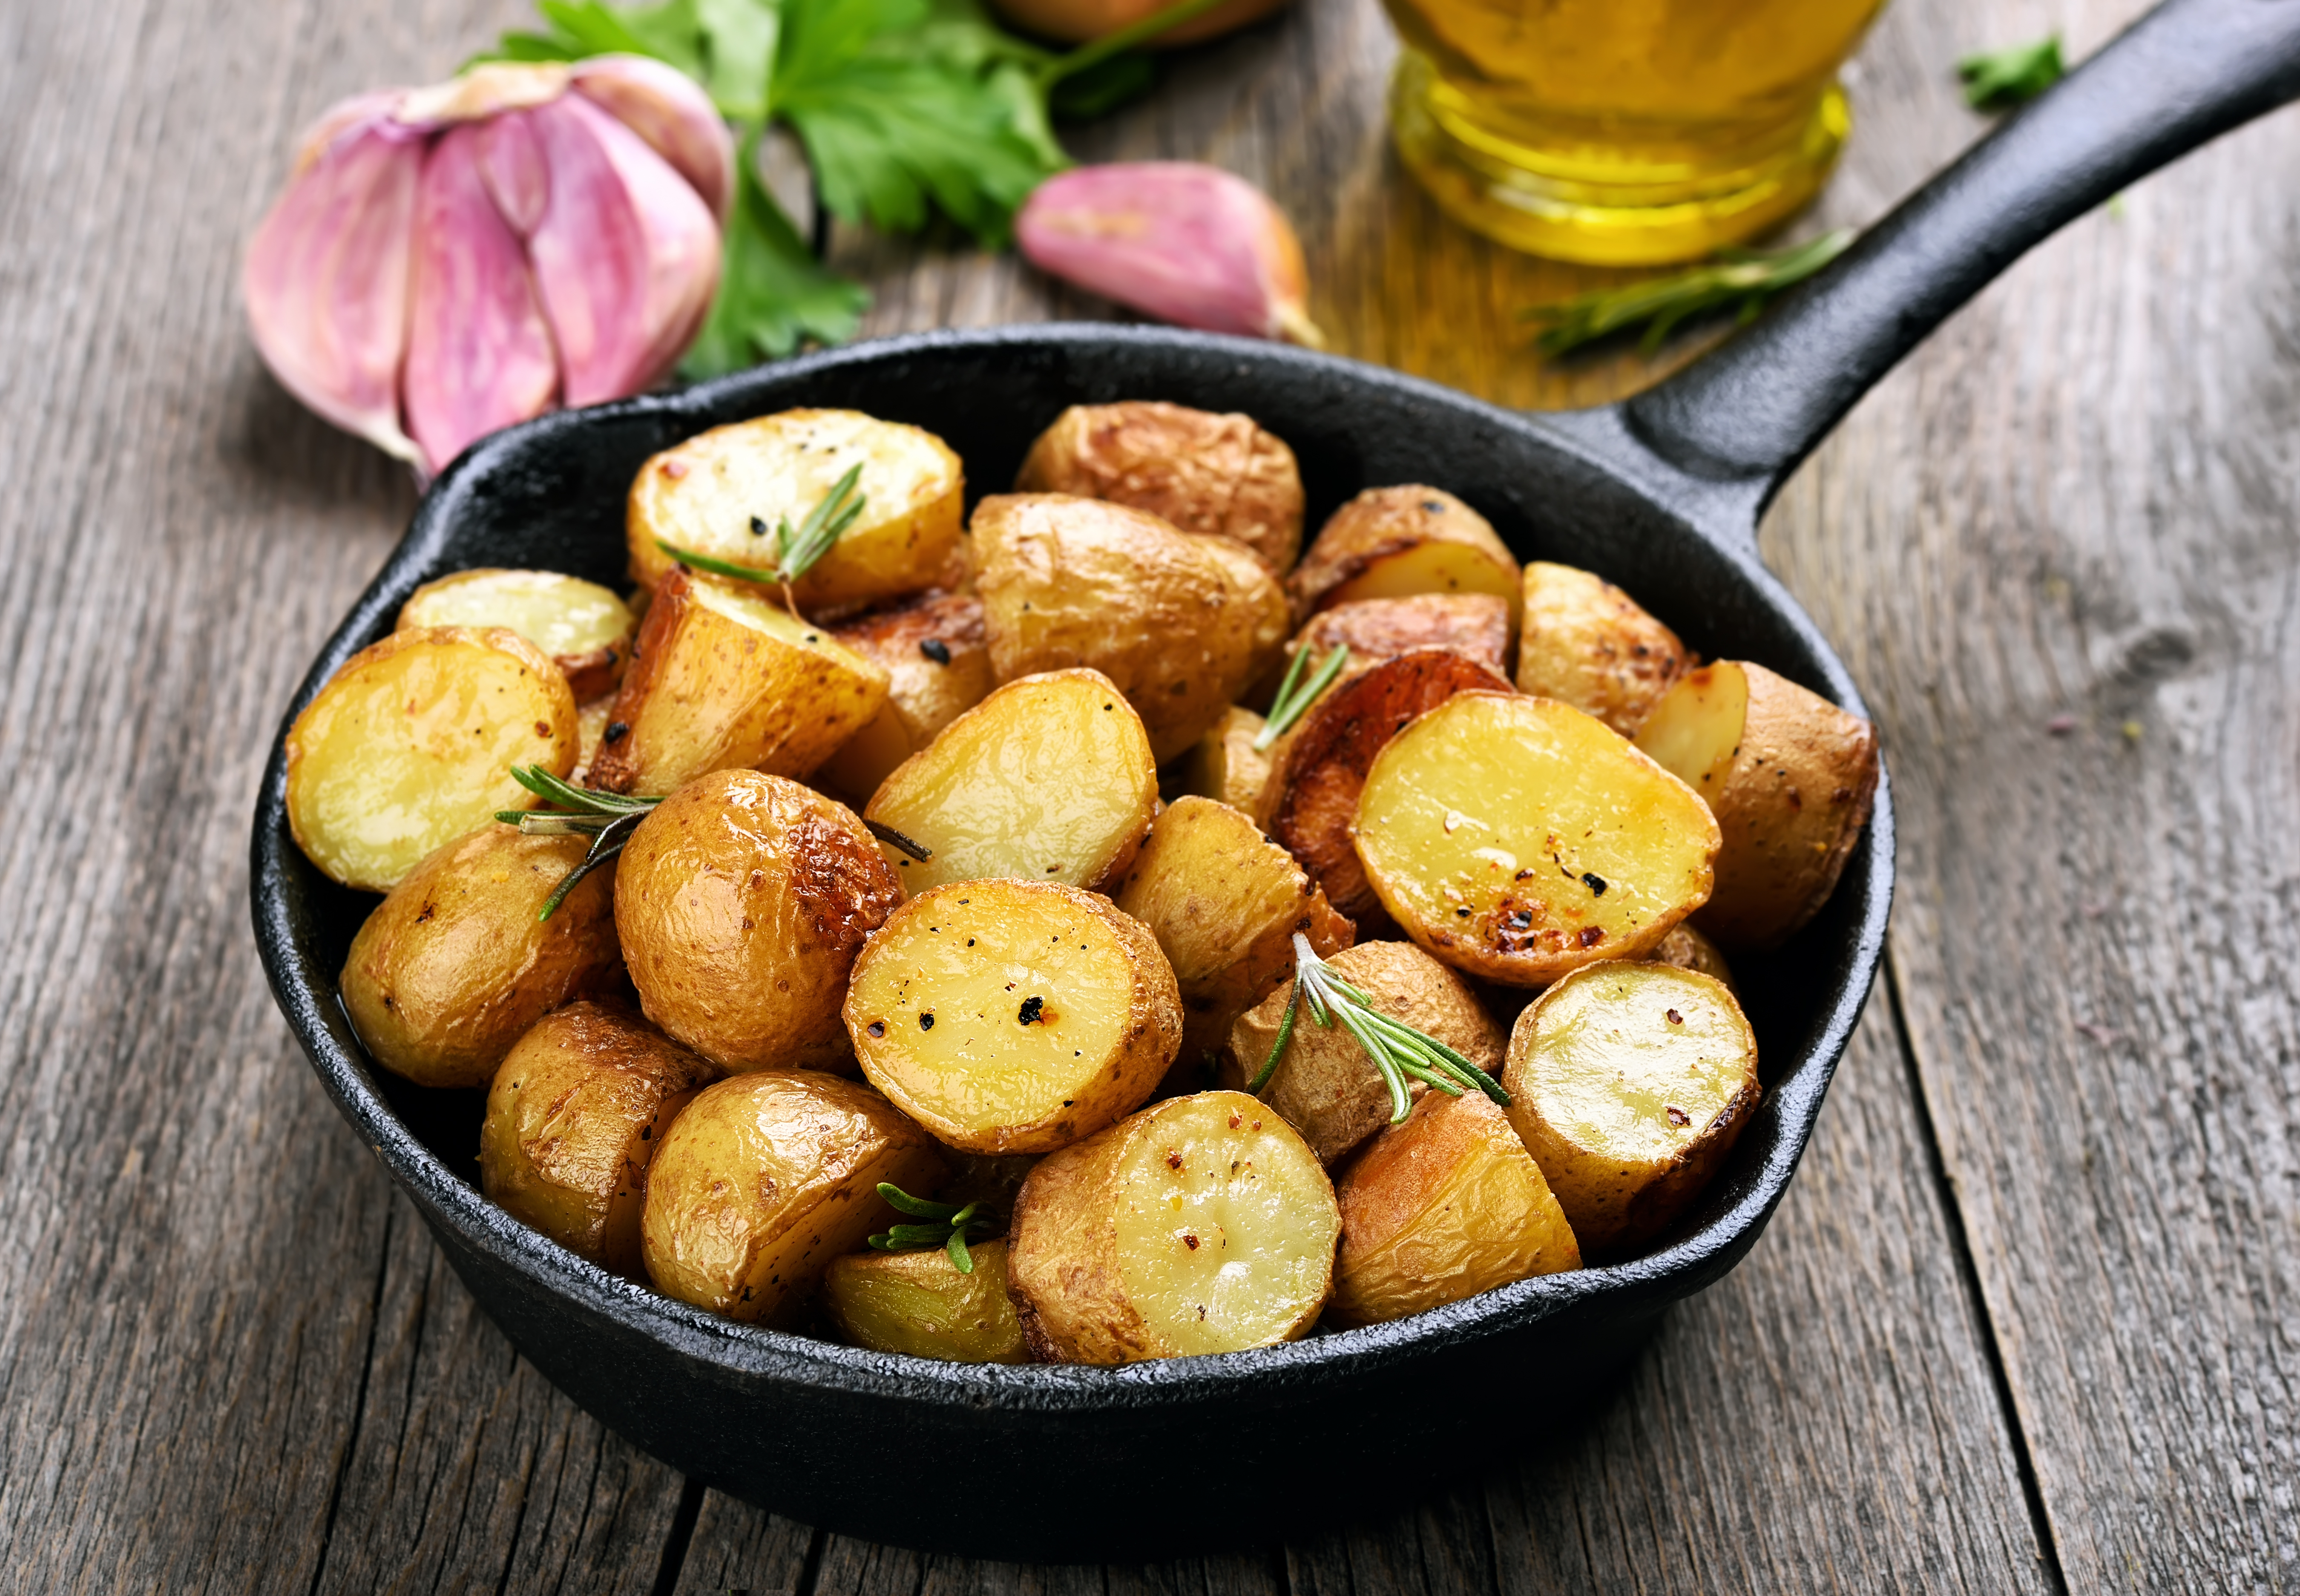 Russets vs. Red vs. Yukon Gold Potatoes: What's the Difference?